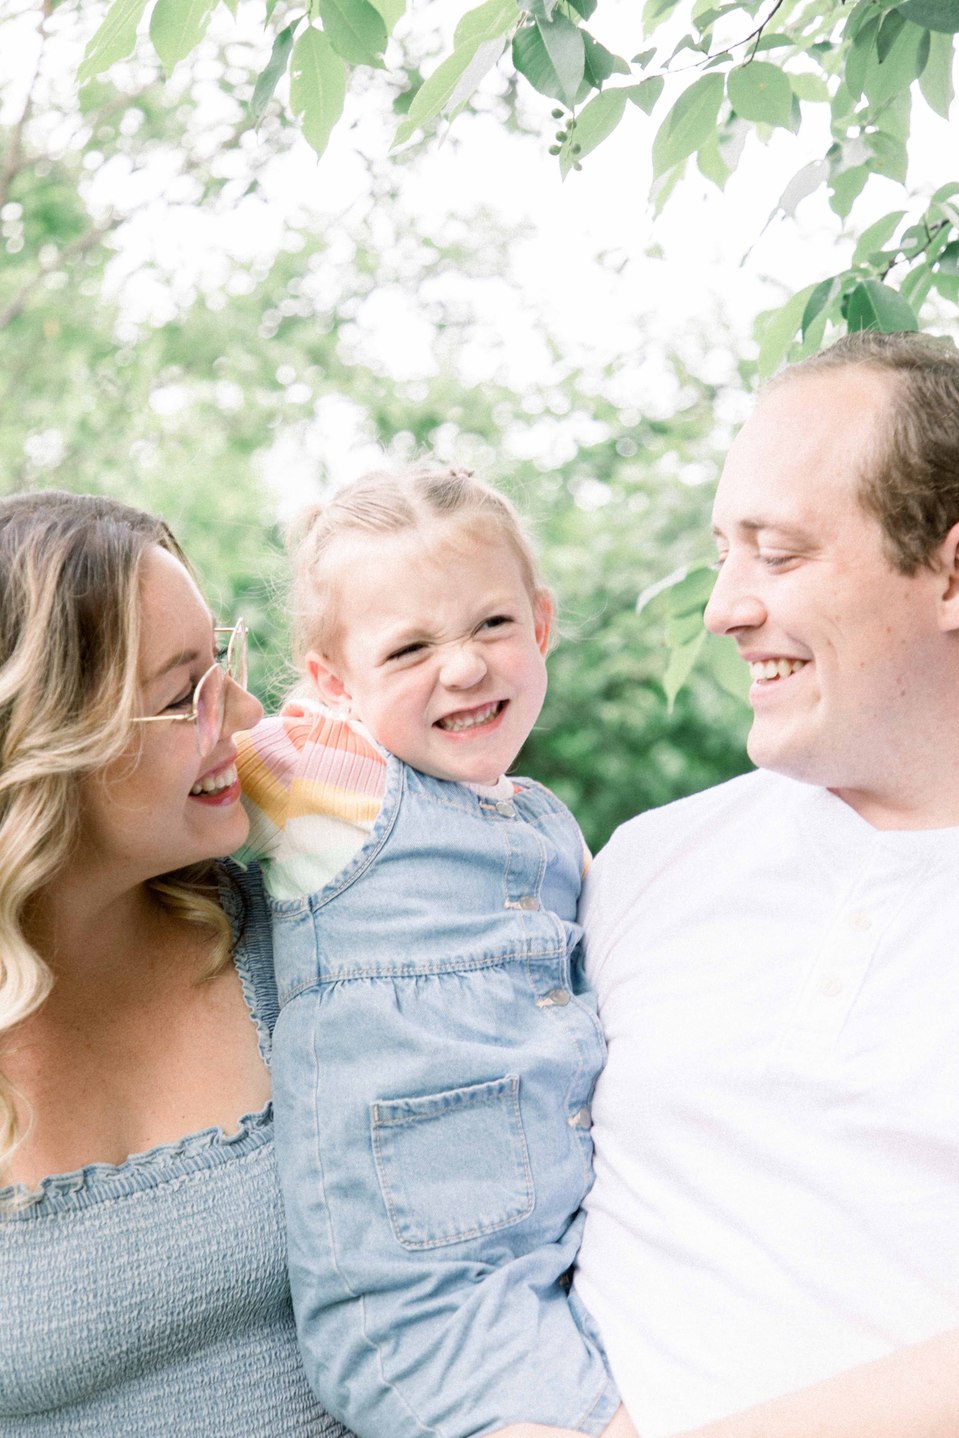 Portrait of family of three hugging and laughing in fruit orchard, Niagara family photographer, Niagara portrait photographer, family photography, portrait photography, candid photography, authentic photography, Emily VanderBeek Photography.